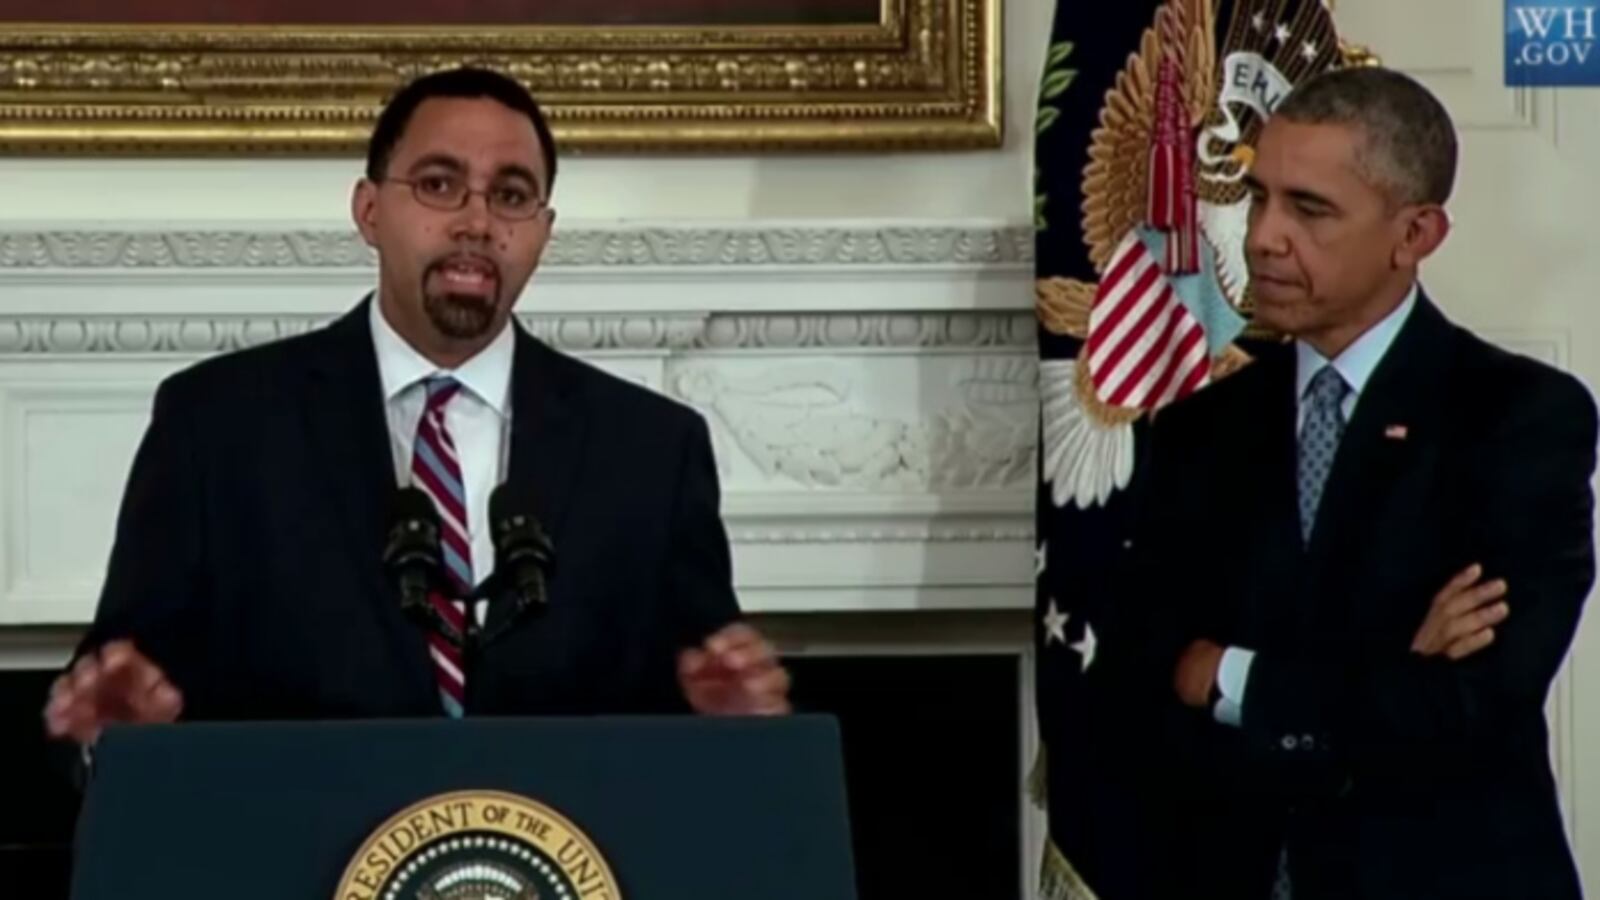 President Obama announced Friday that former New York State Education Commissioner John King would replace Arne Duncan as U.S. education secretary. ( Photo by WhiteHouse.gov )